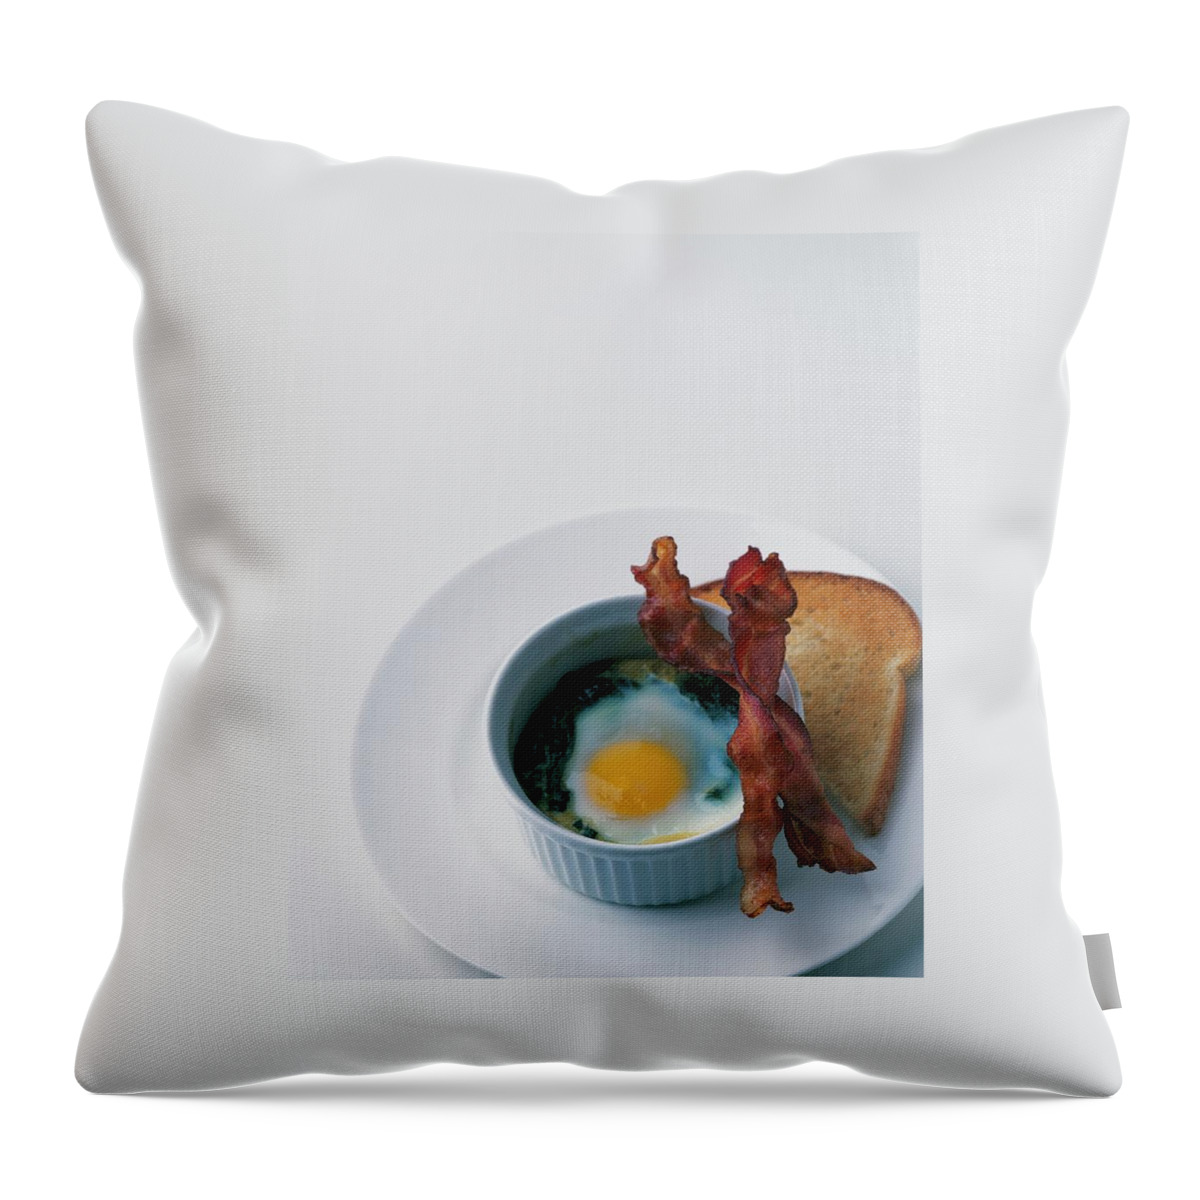 A Baked Egg With Spinach Throw Pillow